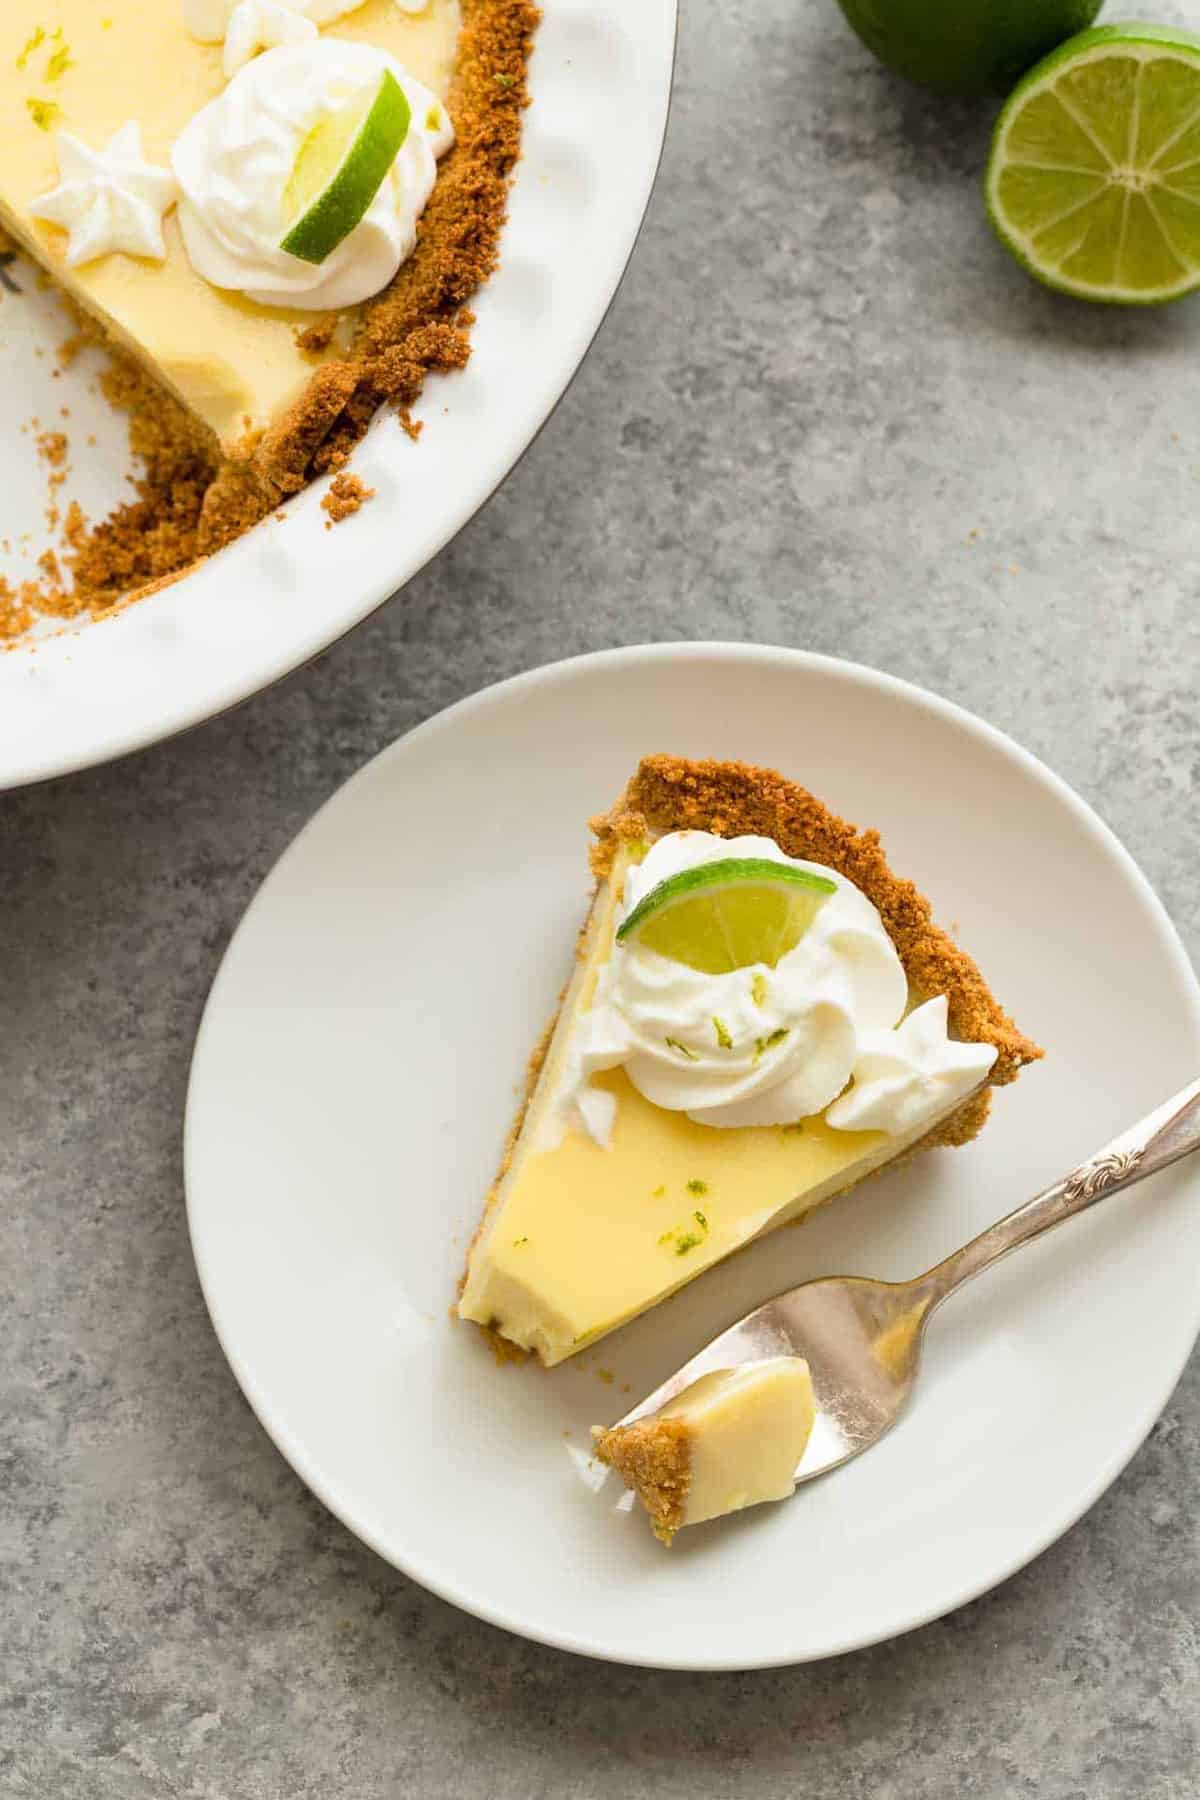 A slice of lime pie on a white plate with a fork taking out a bite.